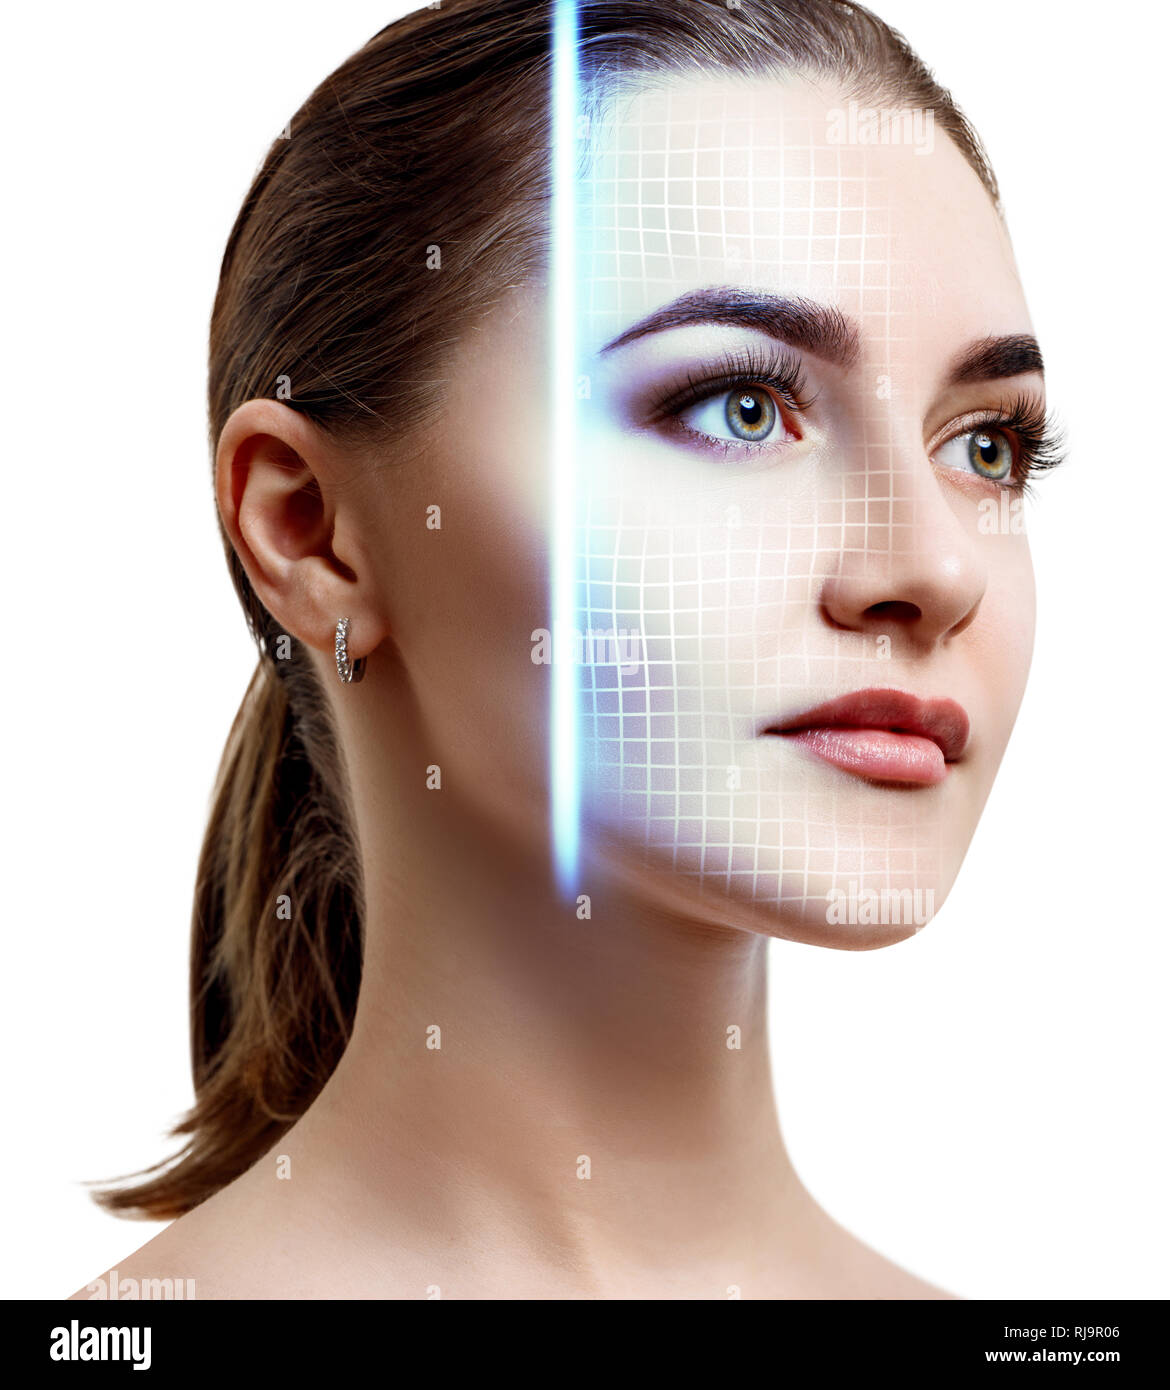 Technological scanning of face of young woman. Stock Photo